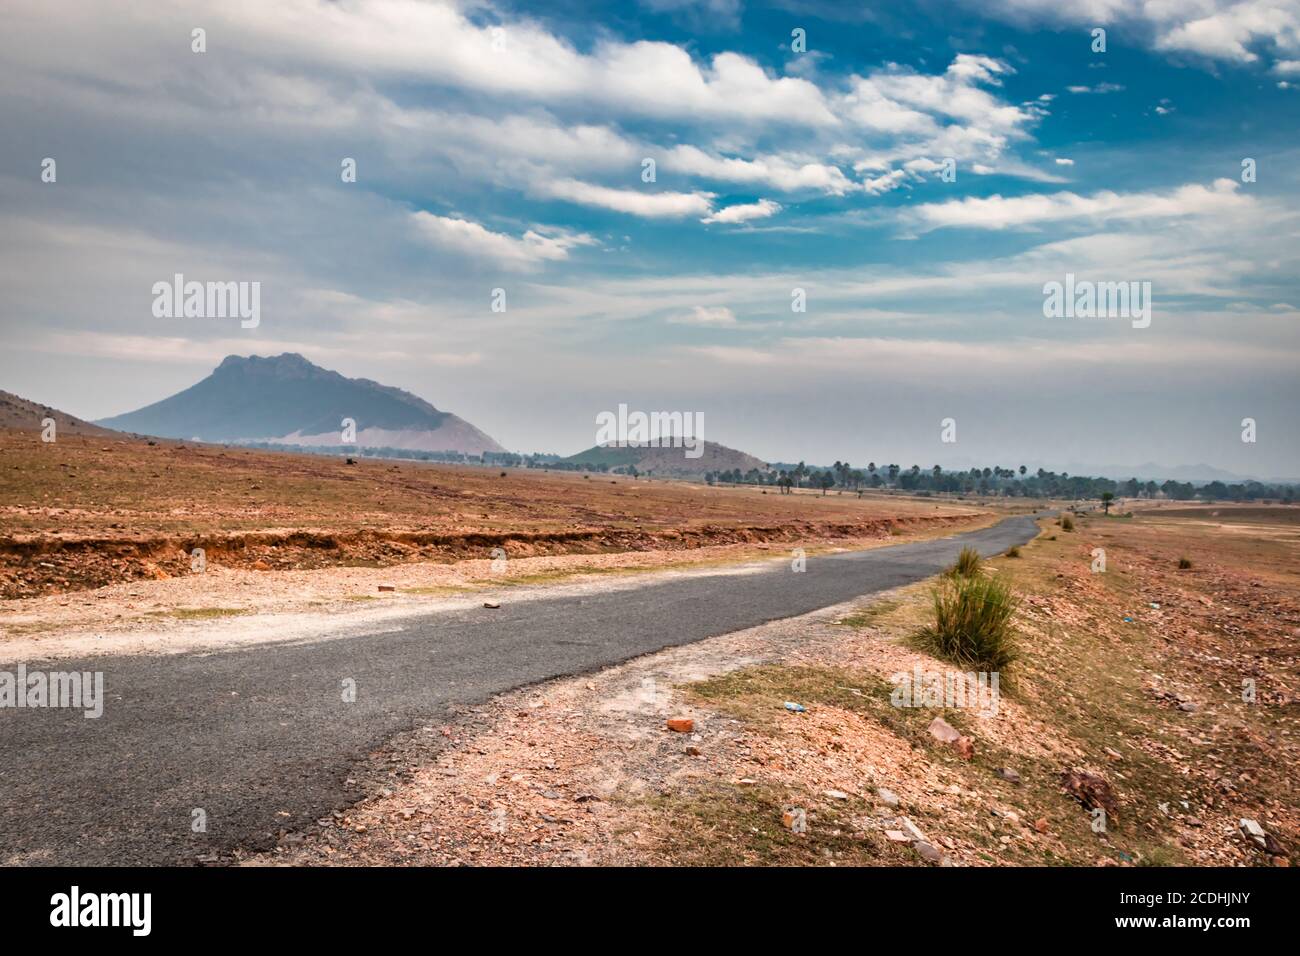 countryside empty rural road with mist and surrounded by mountains at morning image is taken at dashrath manjhi path gaya bihar India. It is showing t Stock Photo